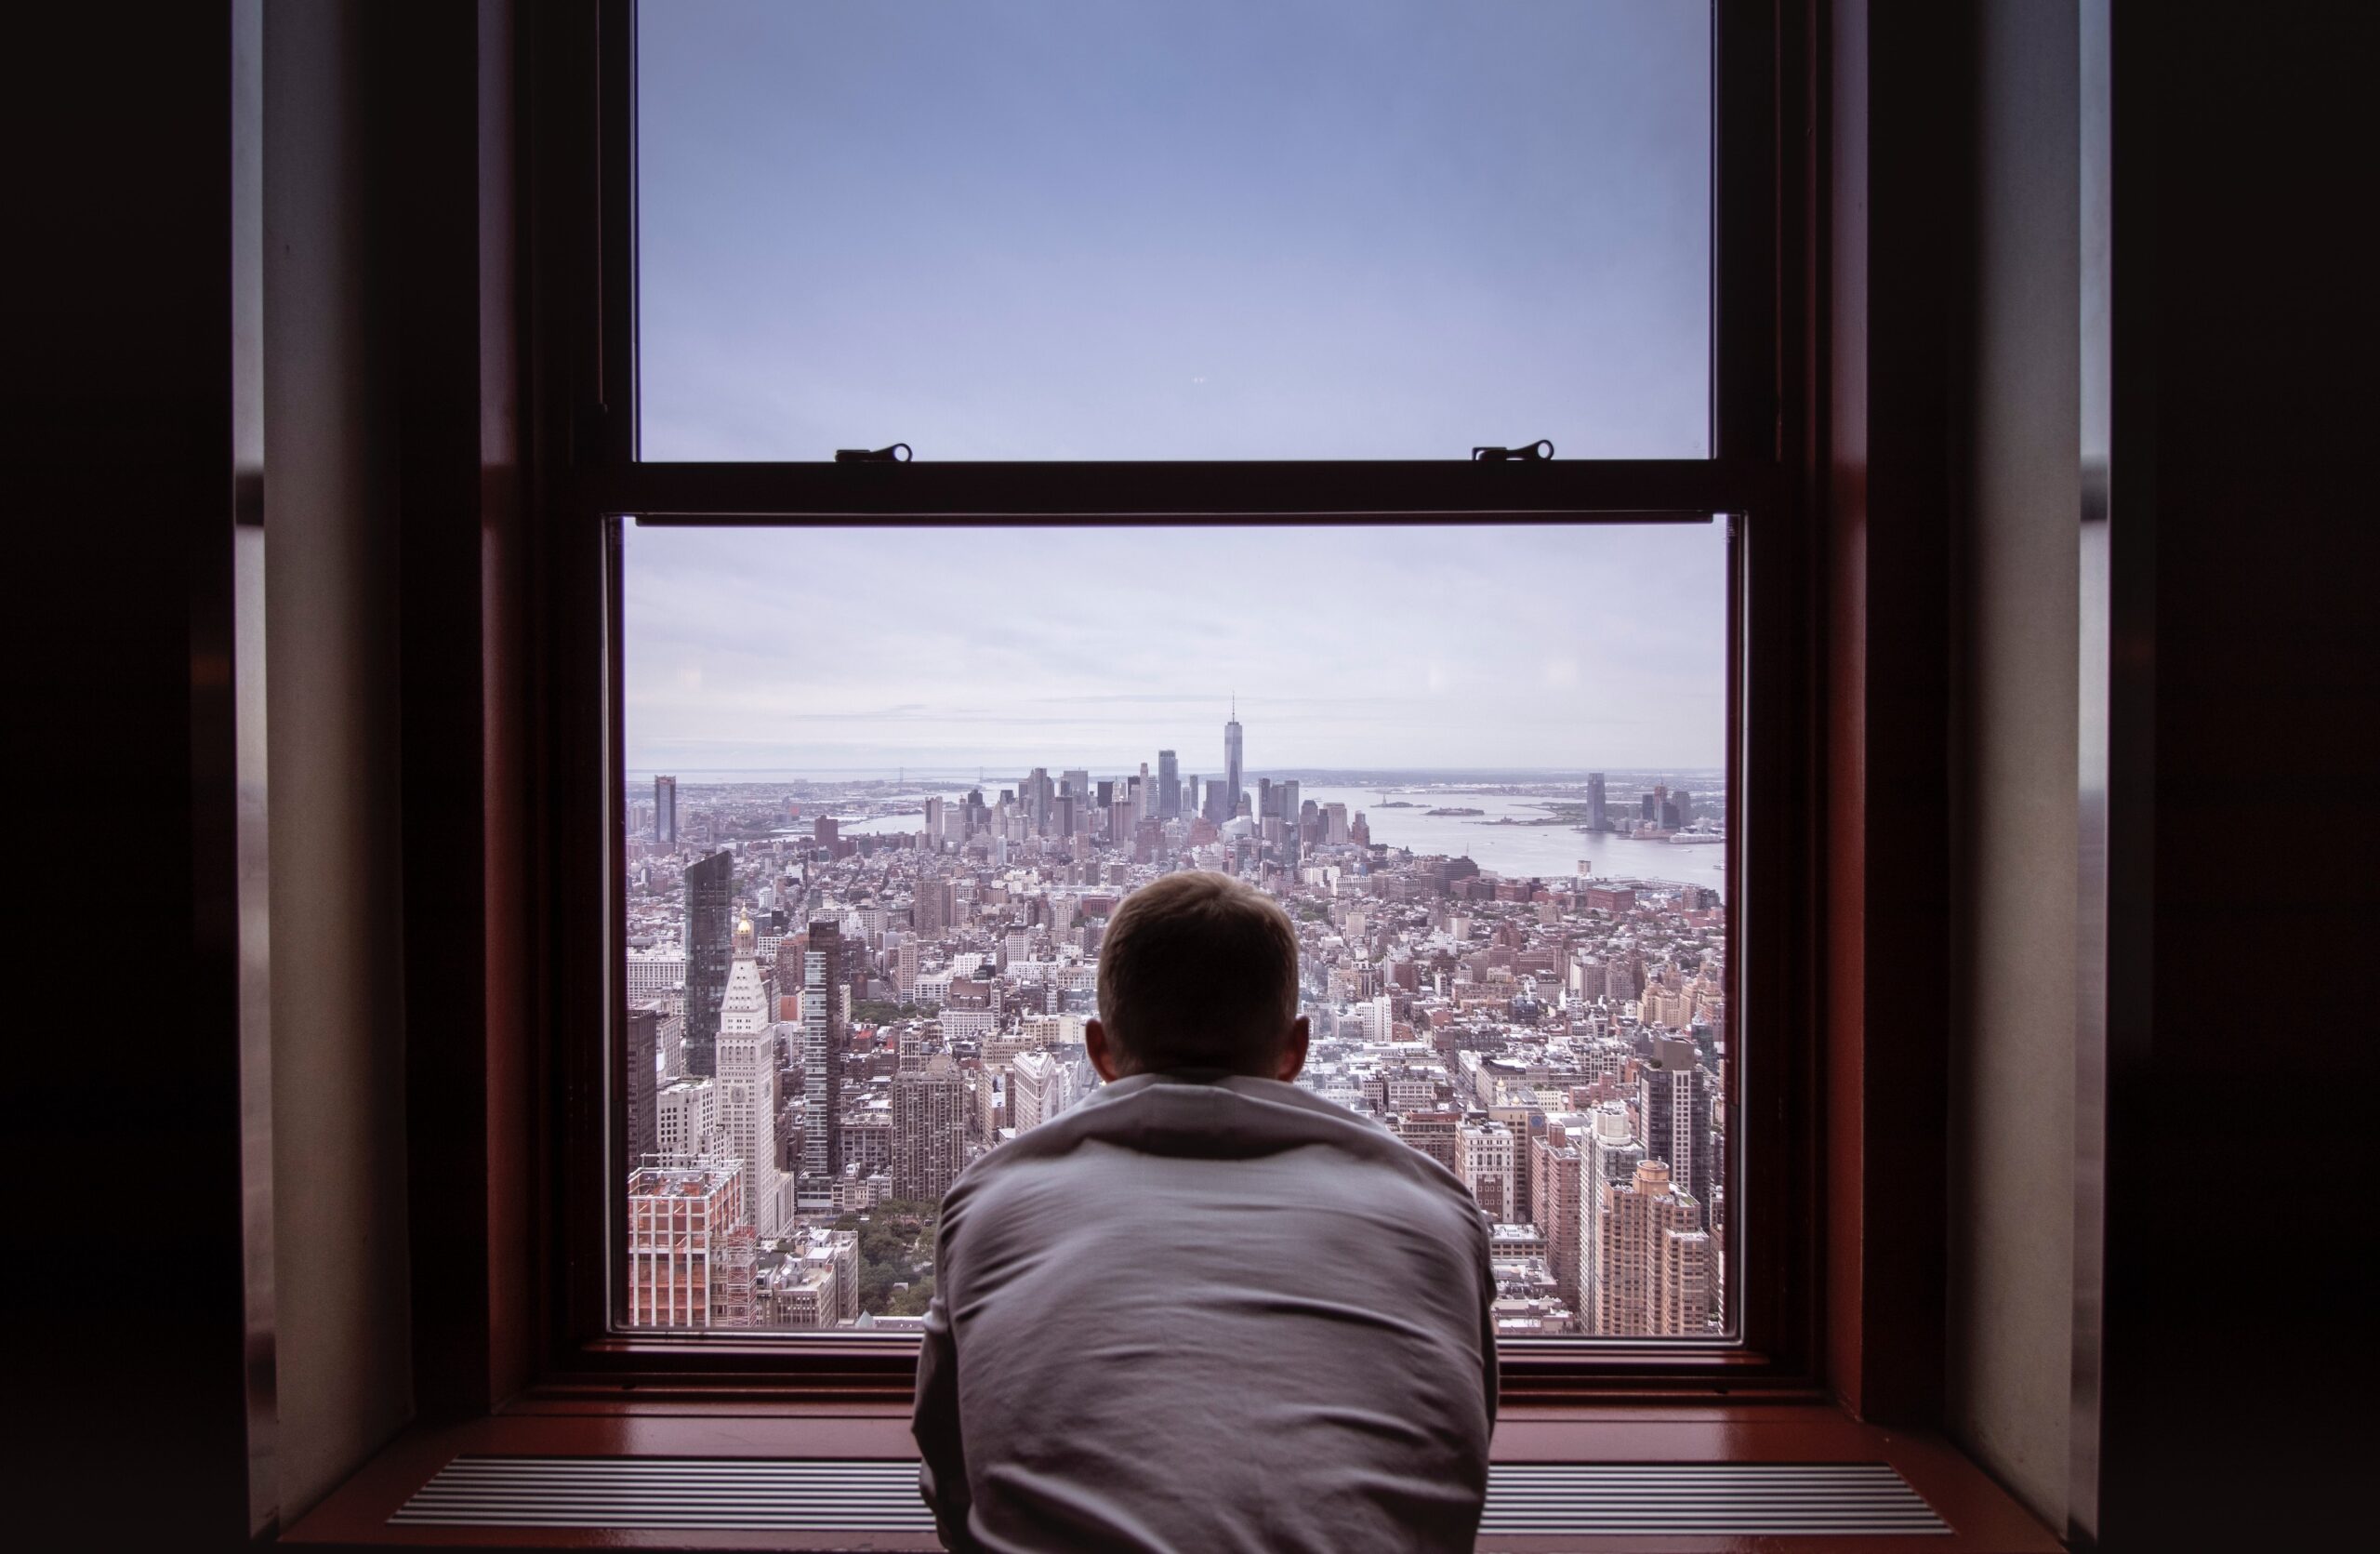 man looking out a window over new york